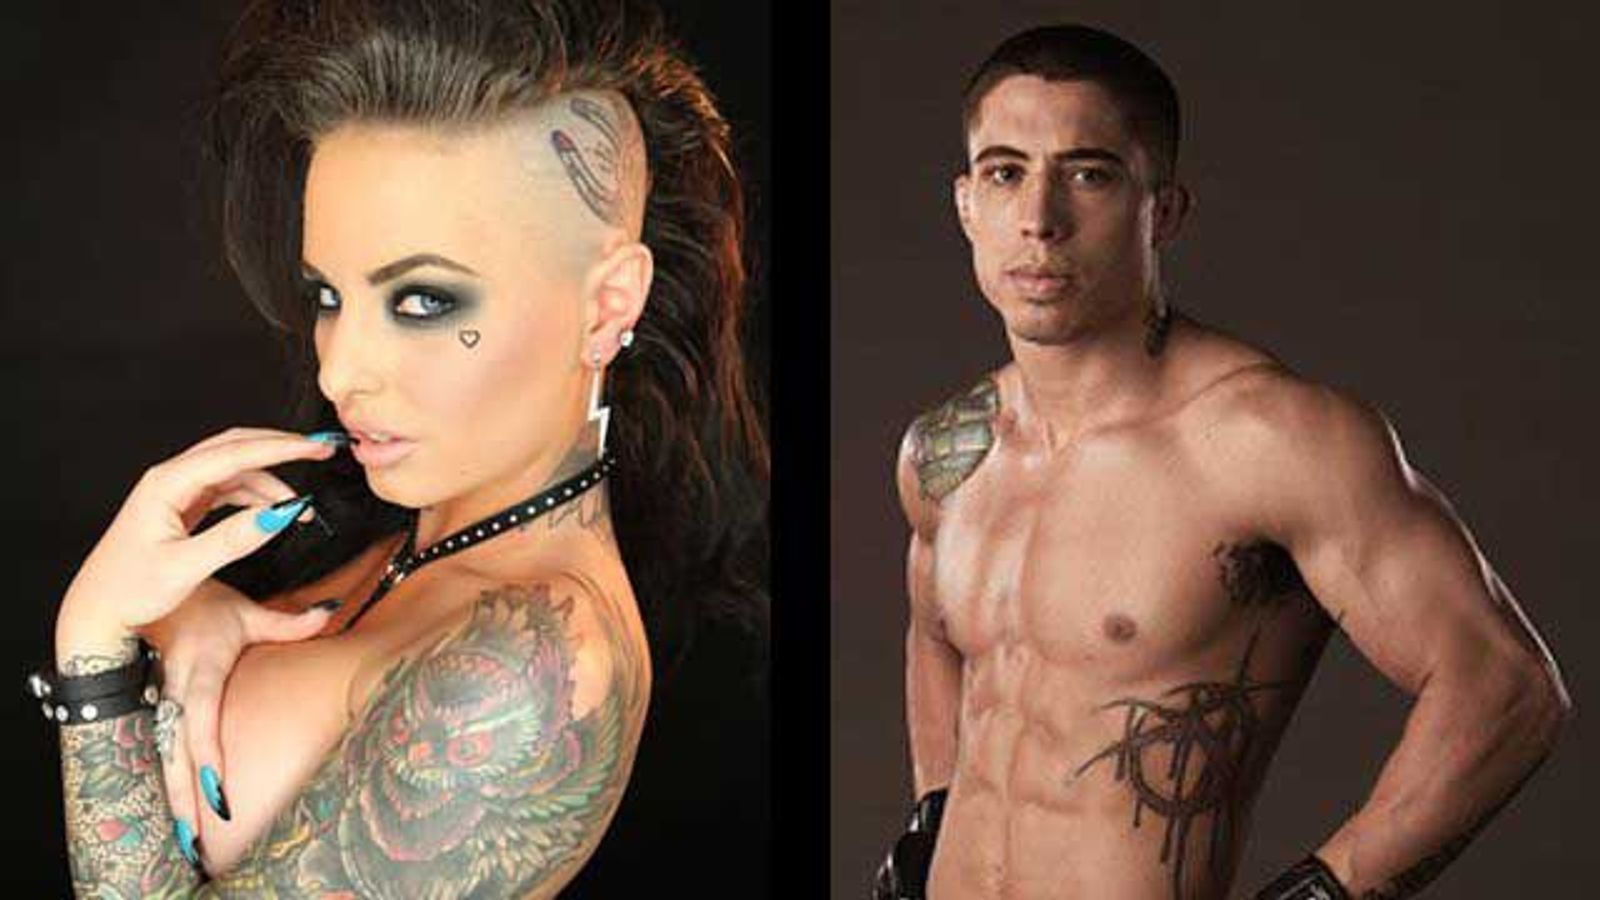 War Machine on the Lam After Violent Altercation - UPDATED